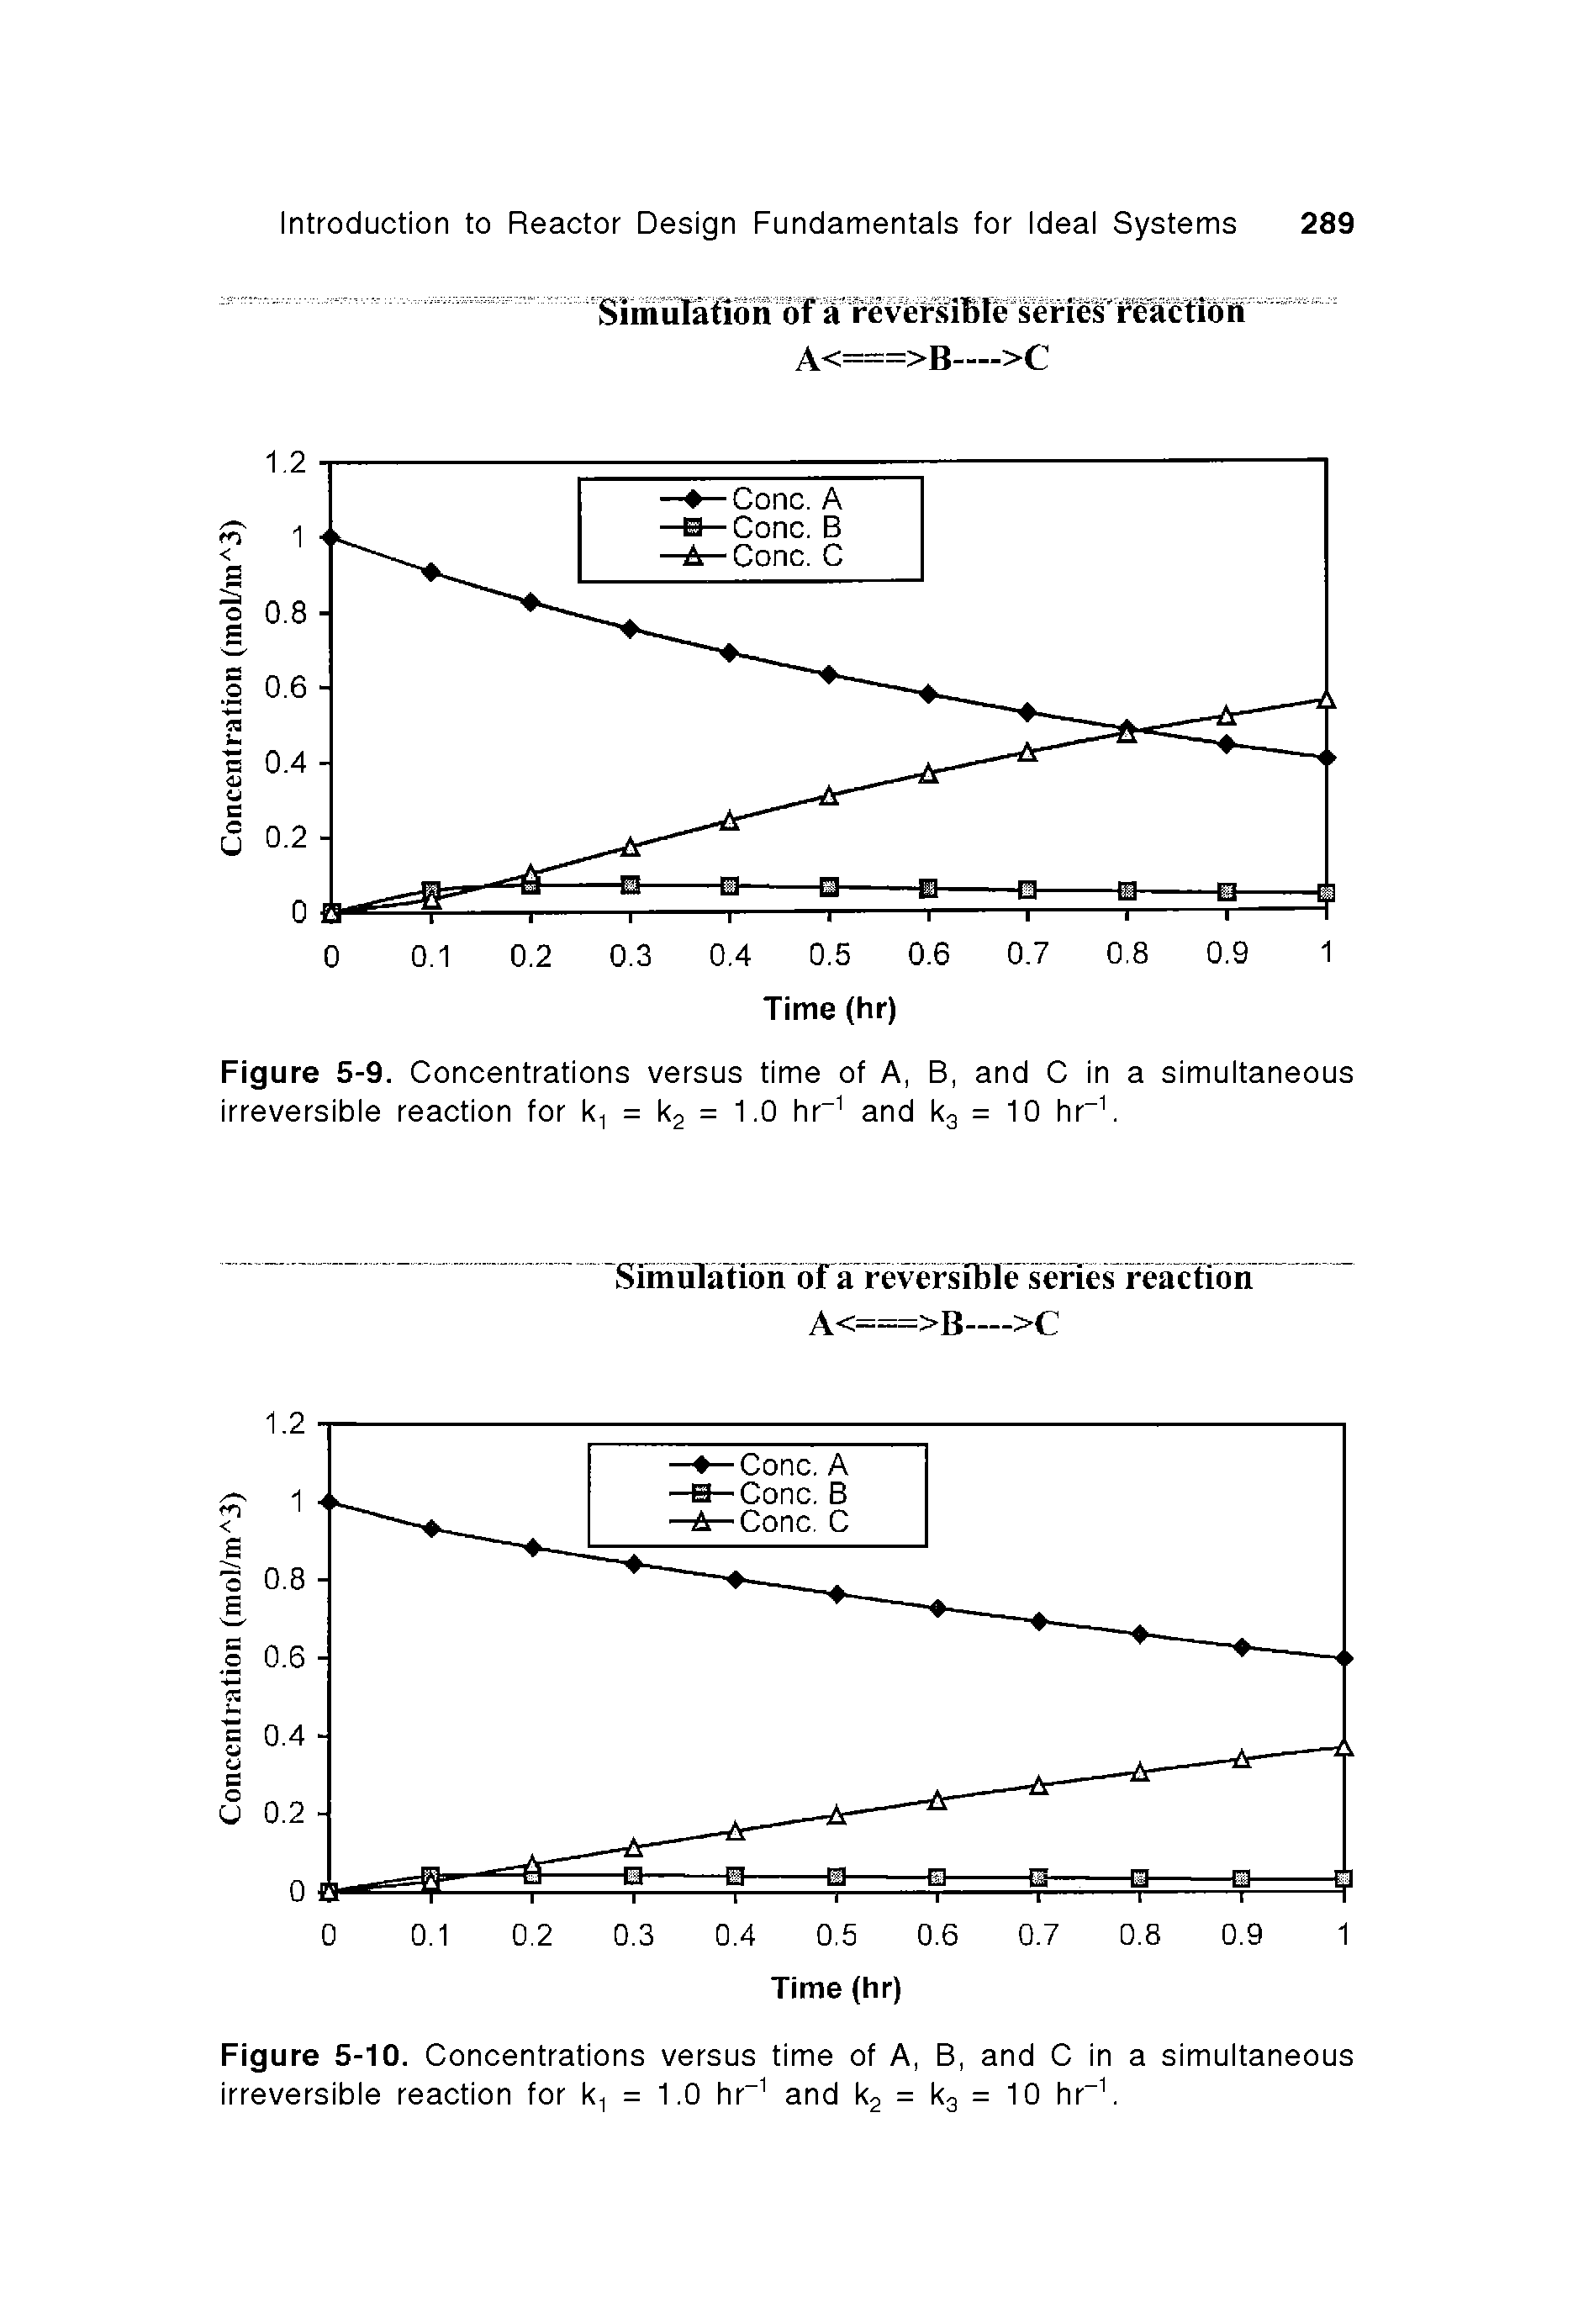 Figure 5-9. Concentrations versus time of A, B, and C in a simultaneous irreversible reaction for k. = I...